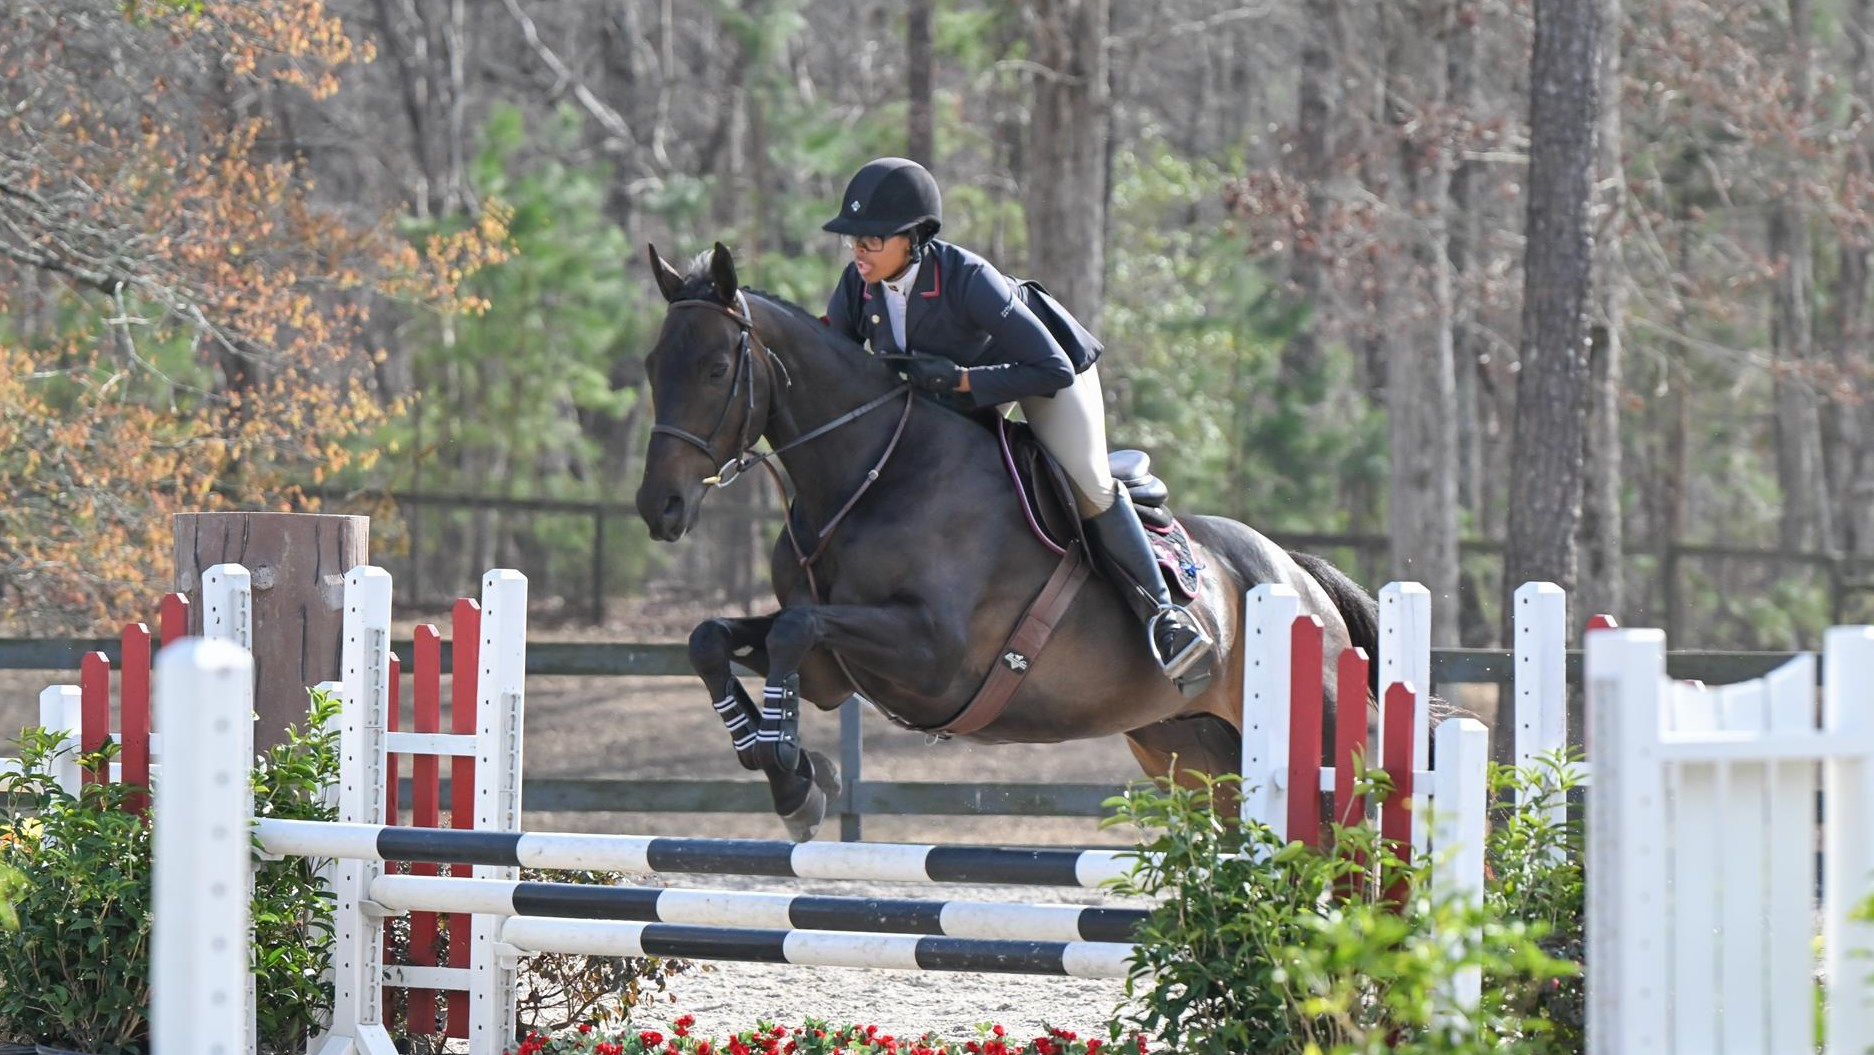 Steve Irwin Awarded NCEA Horse of the Month Honors